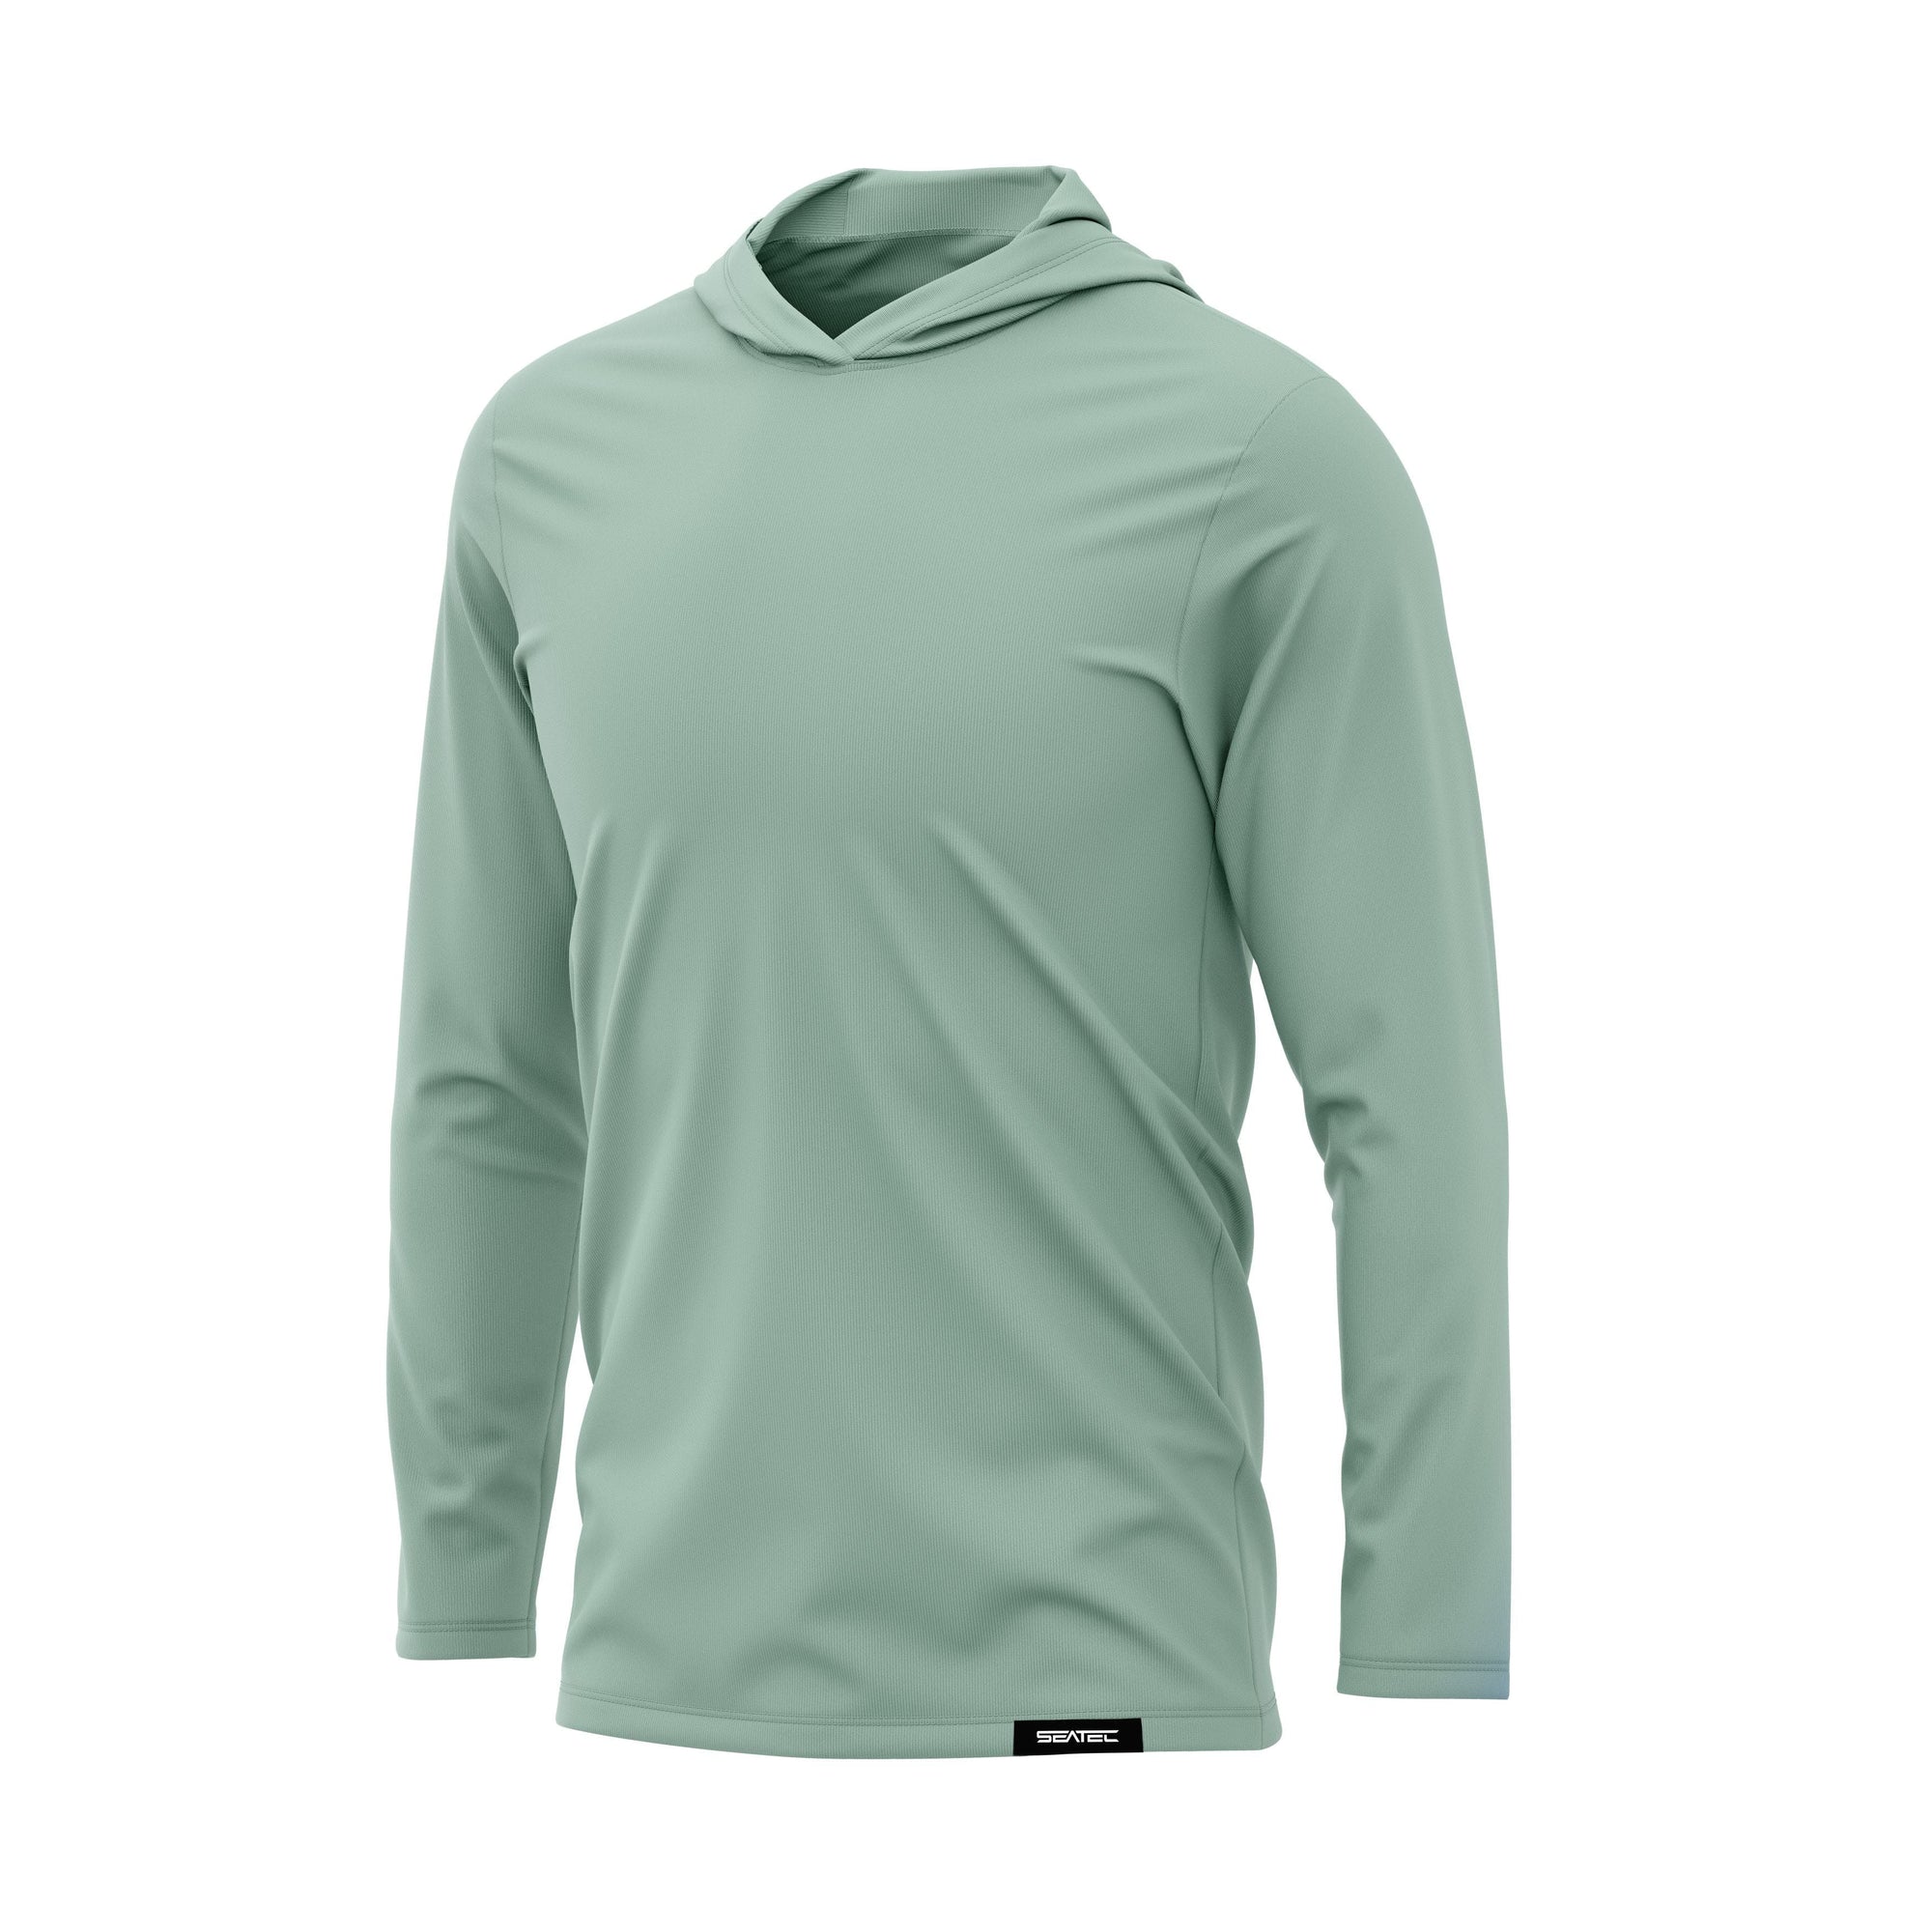 Seatec Outfitters Performance Shirts MEN'S ACTIVE | SEAFOAM | LS HOODED